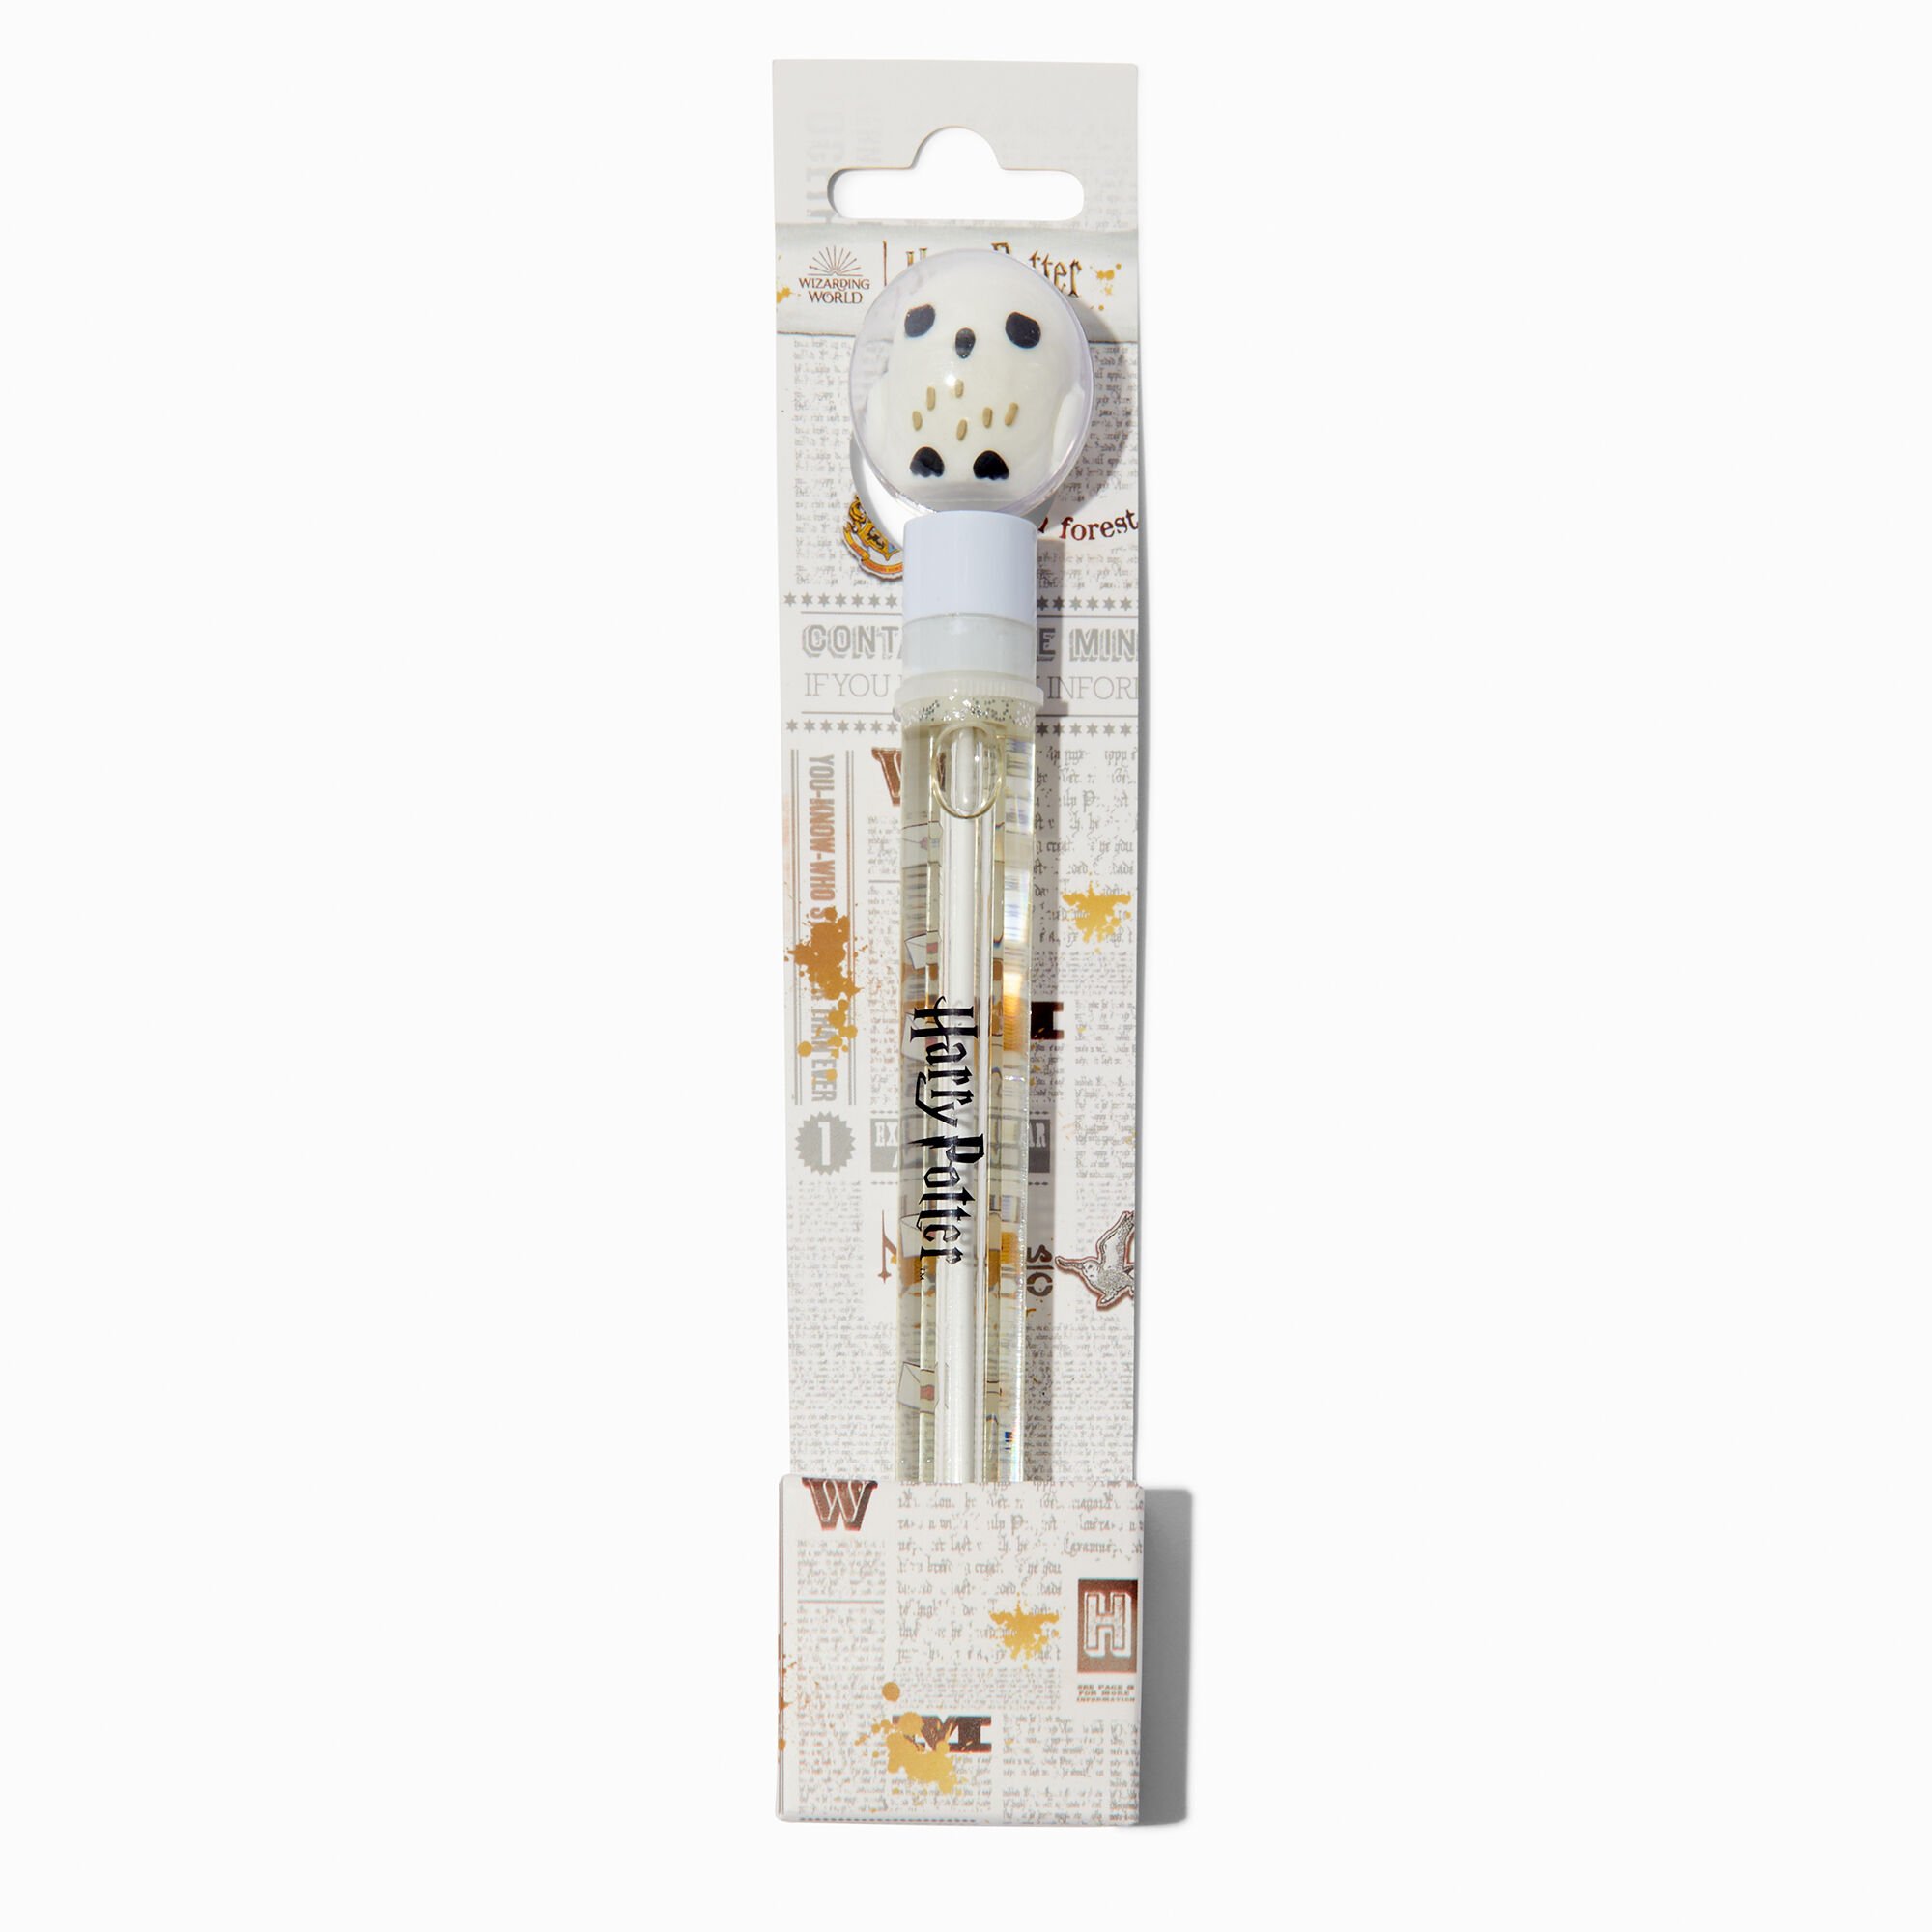 View Claires Harry Potter Hedwig WaterFilled Pen information